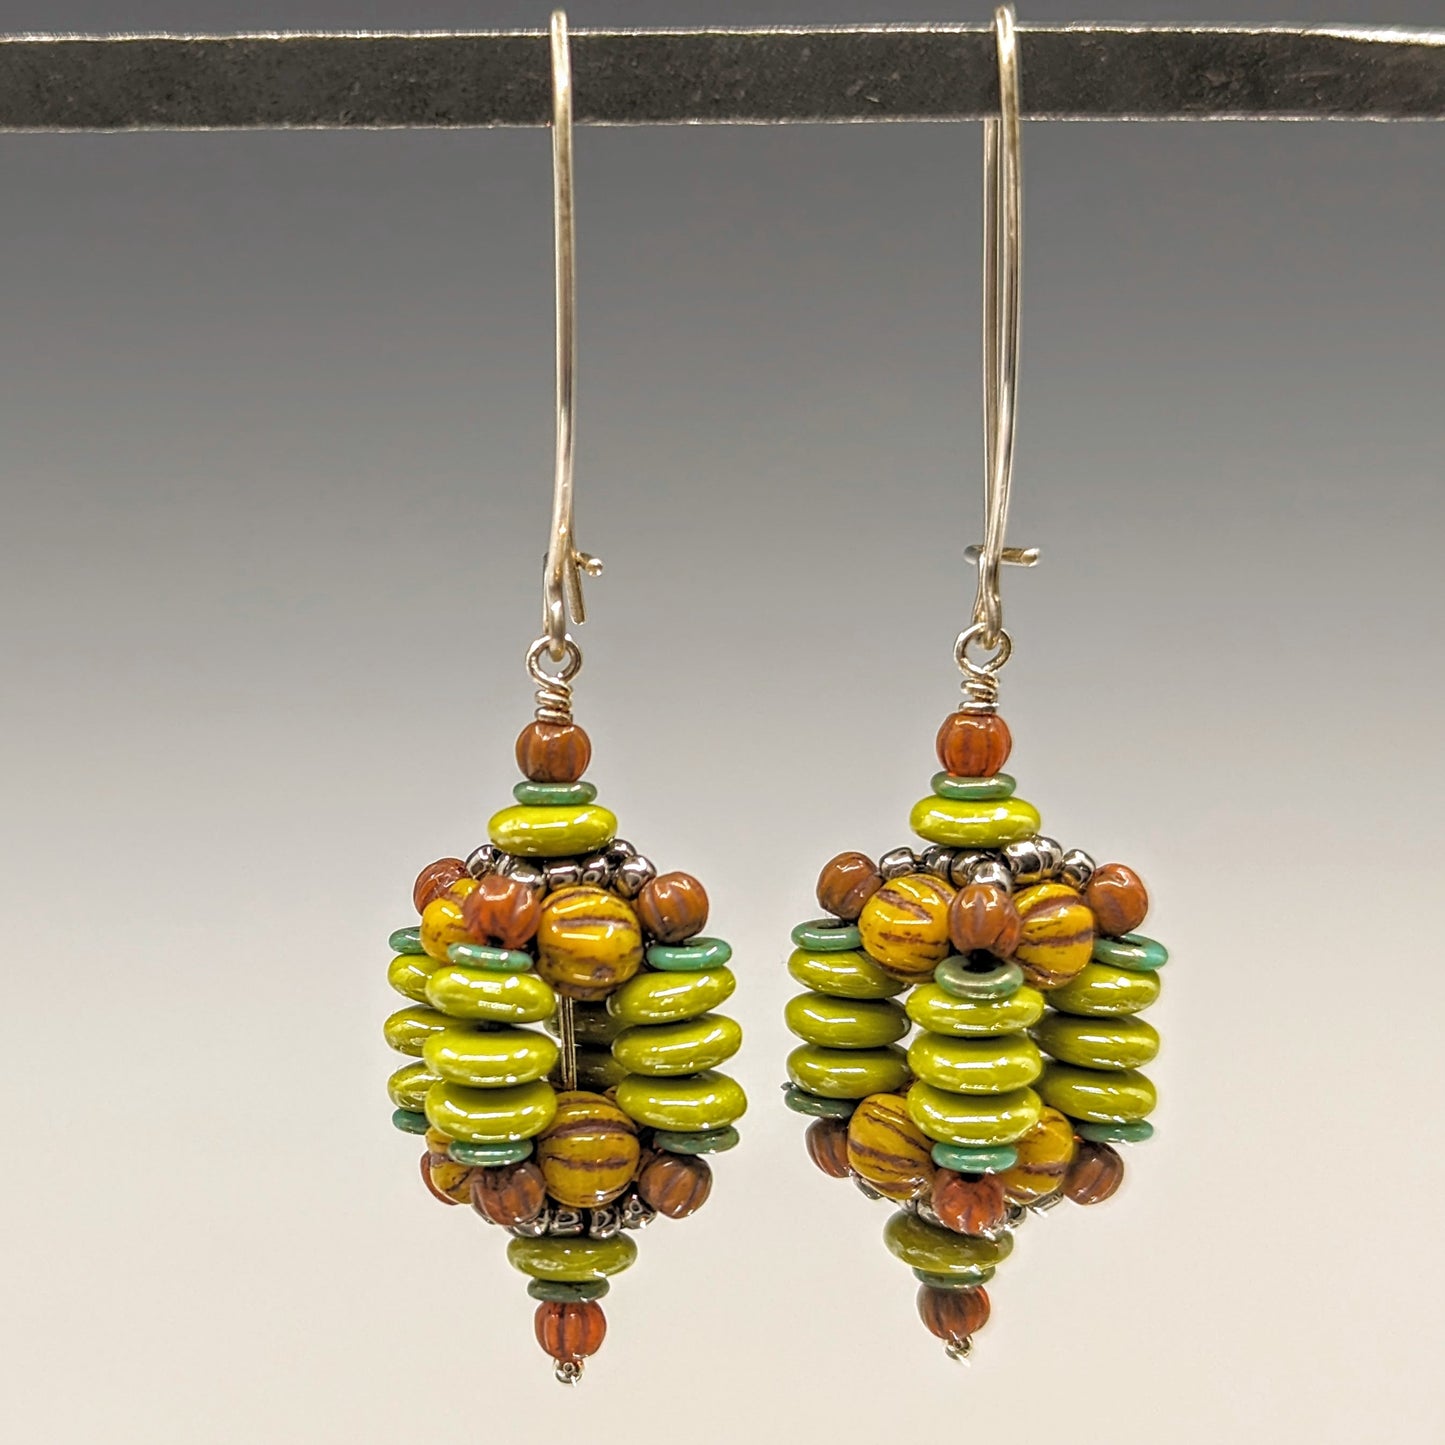 Beaded ball earrings on long silver ear wires. The beaded balls have four sides that are stacked chartreuse discs and the tops of the balls are mustard and rust colored beads.